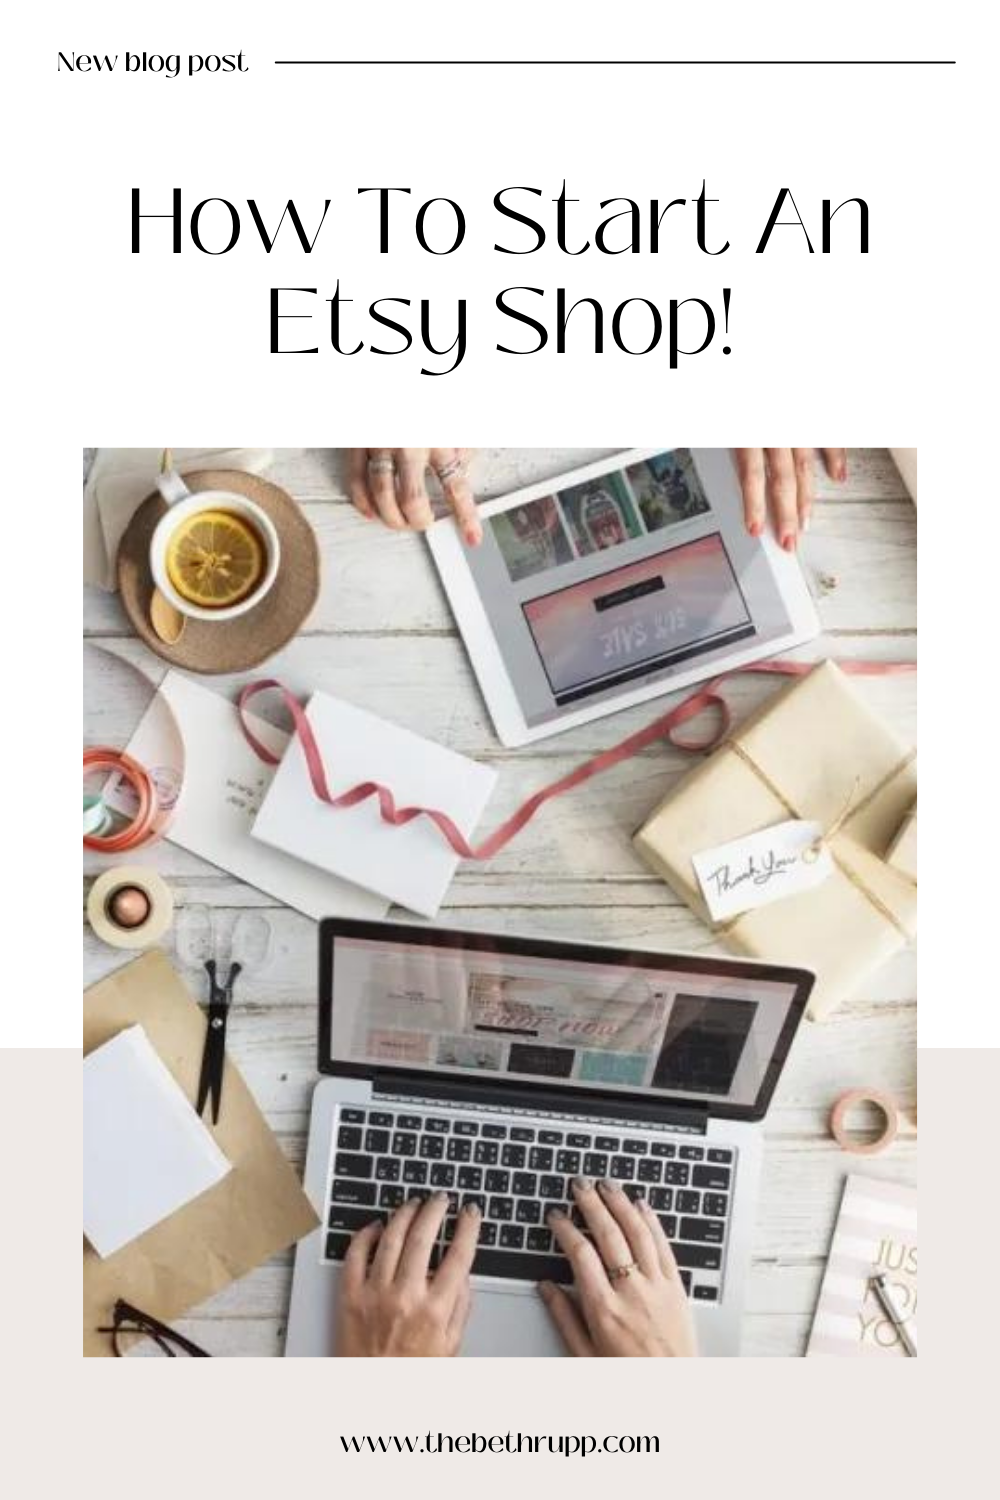 How To Start Your Own Etsy Shop!